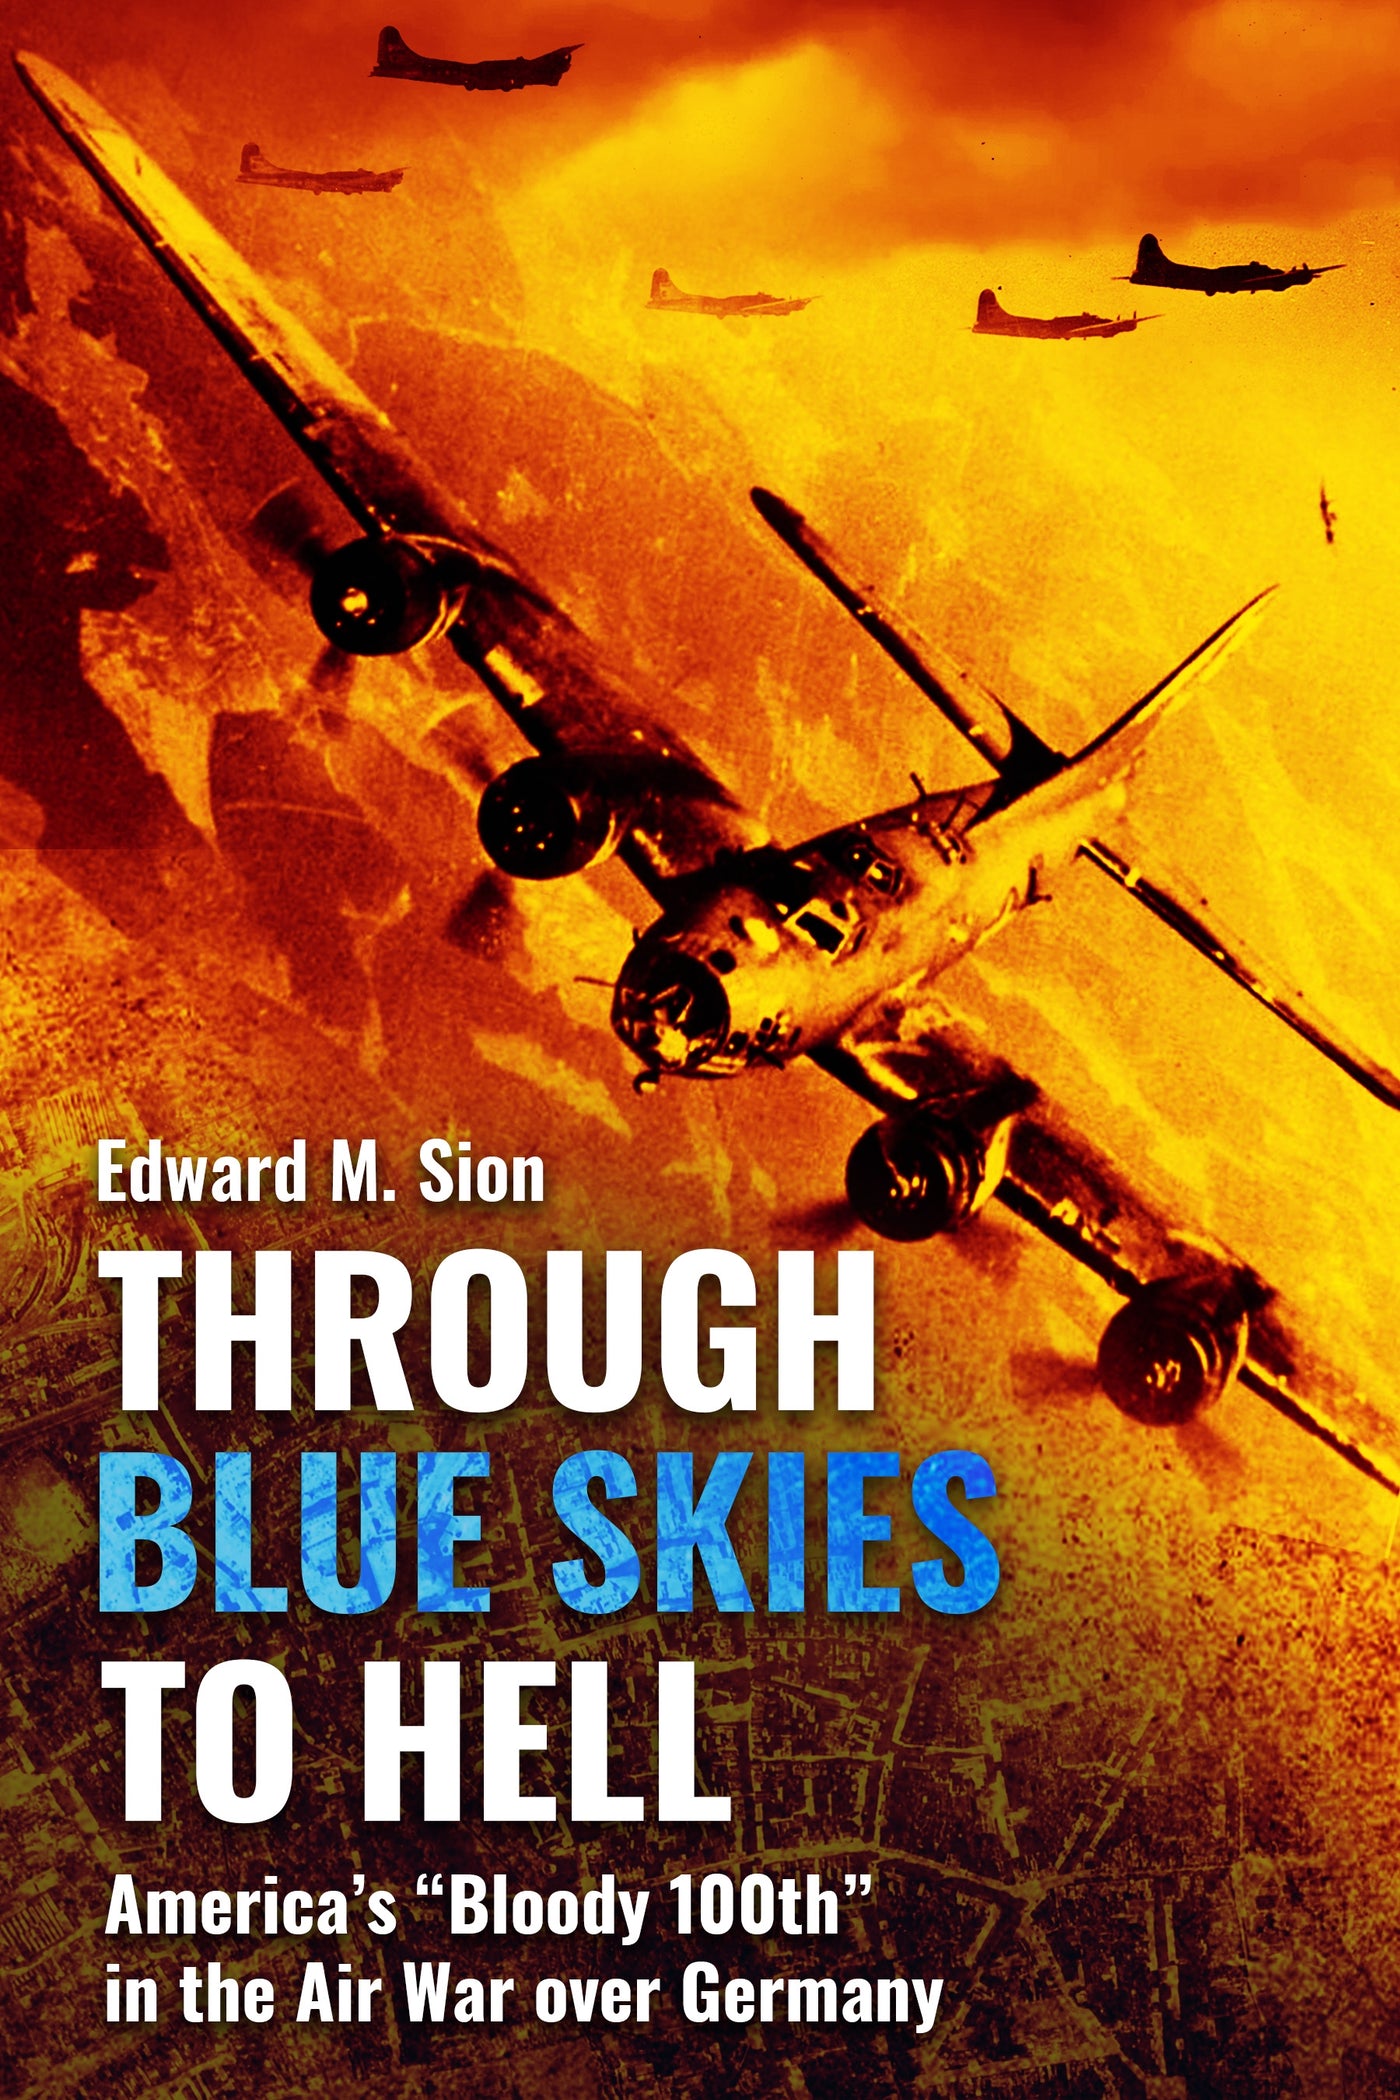 Through Blue Skies to Hell